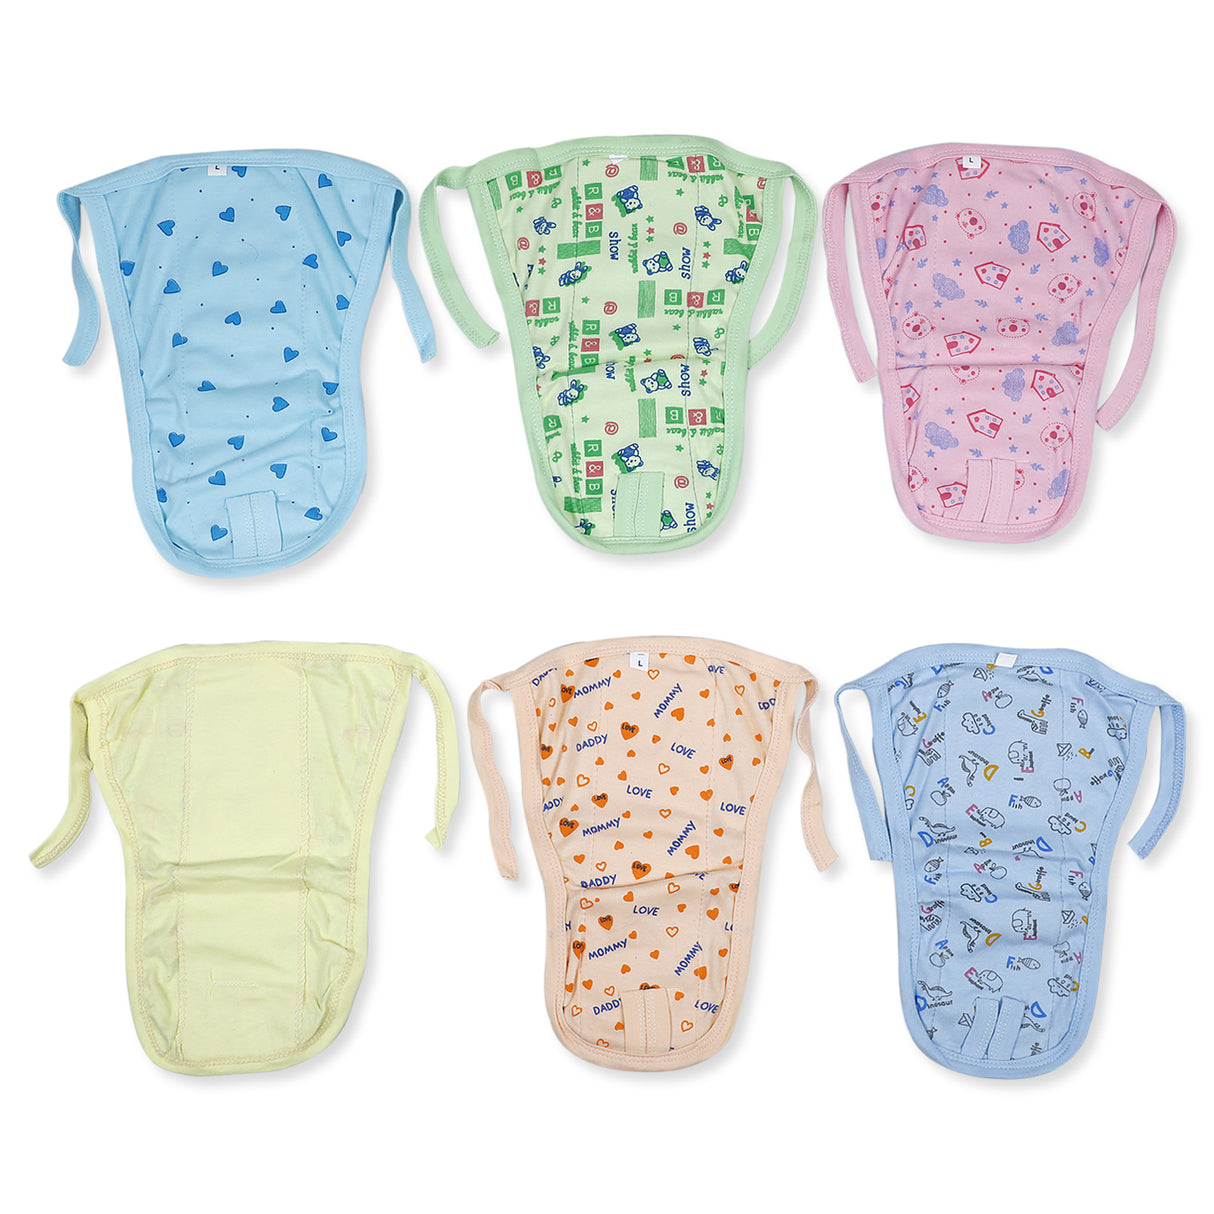 Breathable Comfy Baby Cotton Padded Langot